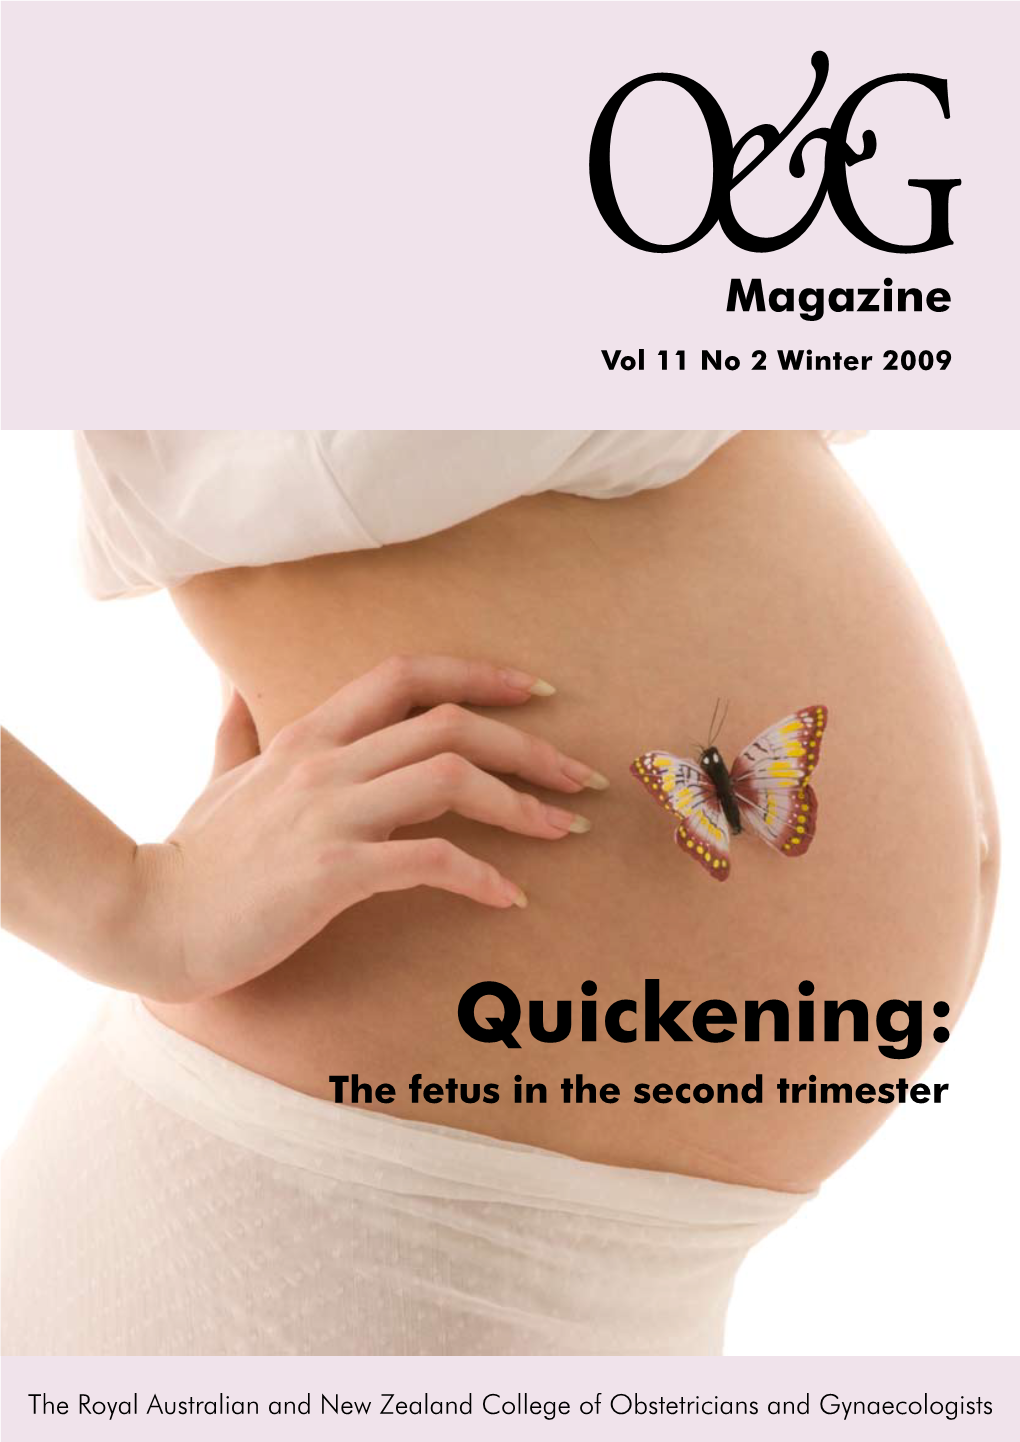 Quickening: the Fetus in the Second Trimester